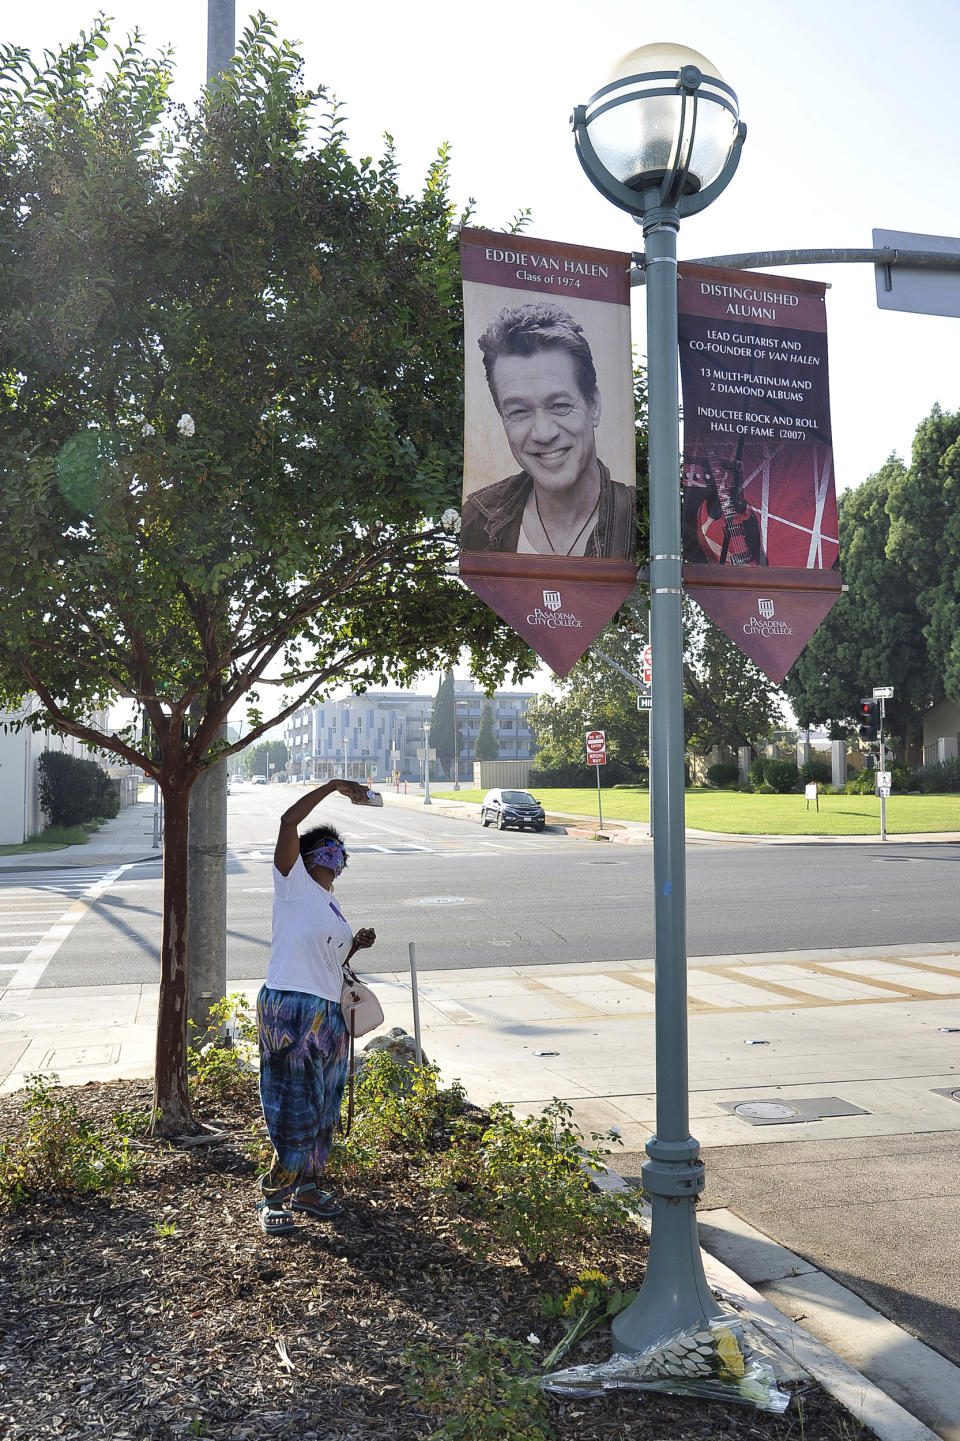 FILE - In this Oct. 6, 2020, file photo Daniel Gaither, of Pasadena, photographs a banner acknowledging distinguished Pasadena City College alumnus Eddie Van Halen at the college in Pasadena, Calif. Van Halen's Southern California hometown will memorialize the late guitar legend, but it's still unclear what form the tribute will take. The Pasadena City Council on Monday, Oct. 26, 2020, directed officials to come up with ideas and report back on how to best remember the rock icon who died of cancer Oct. 6, 2020, at age 65. (Richard Shotwell/Invision/AP, File)